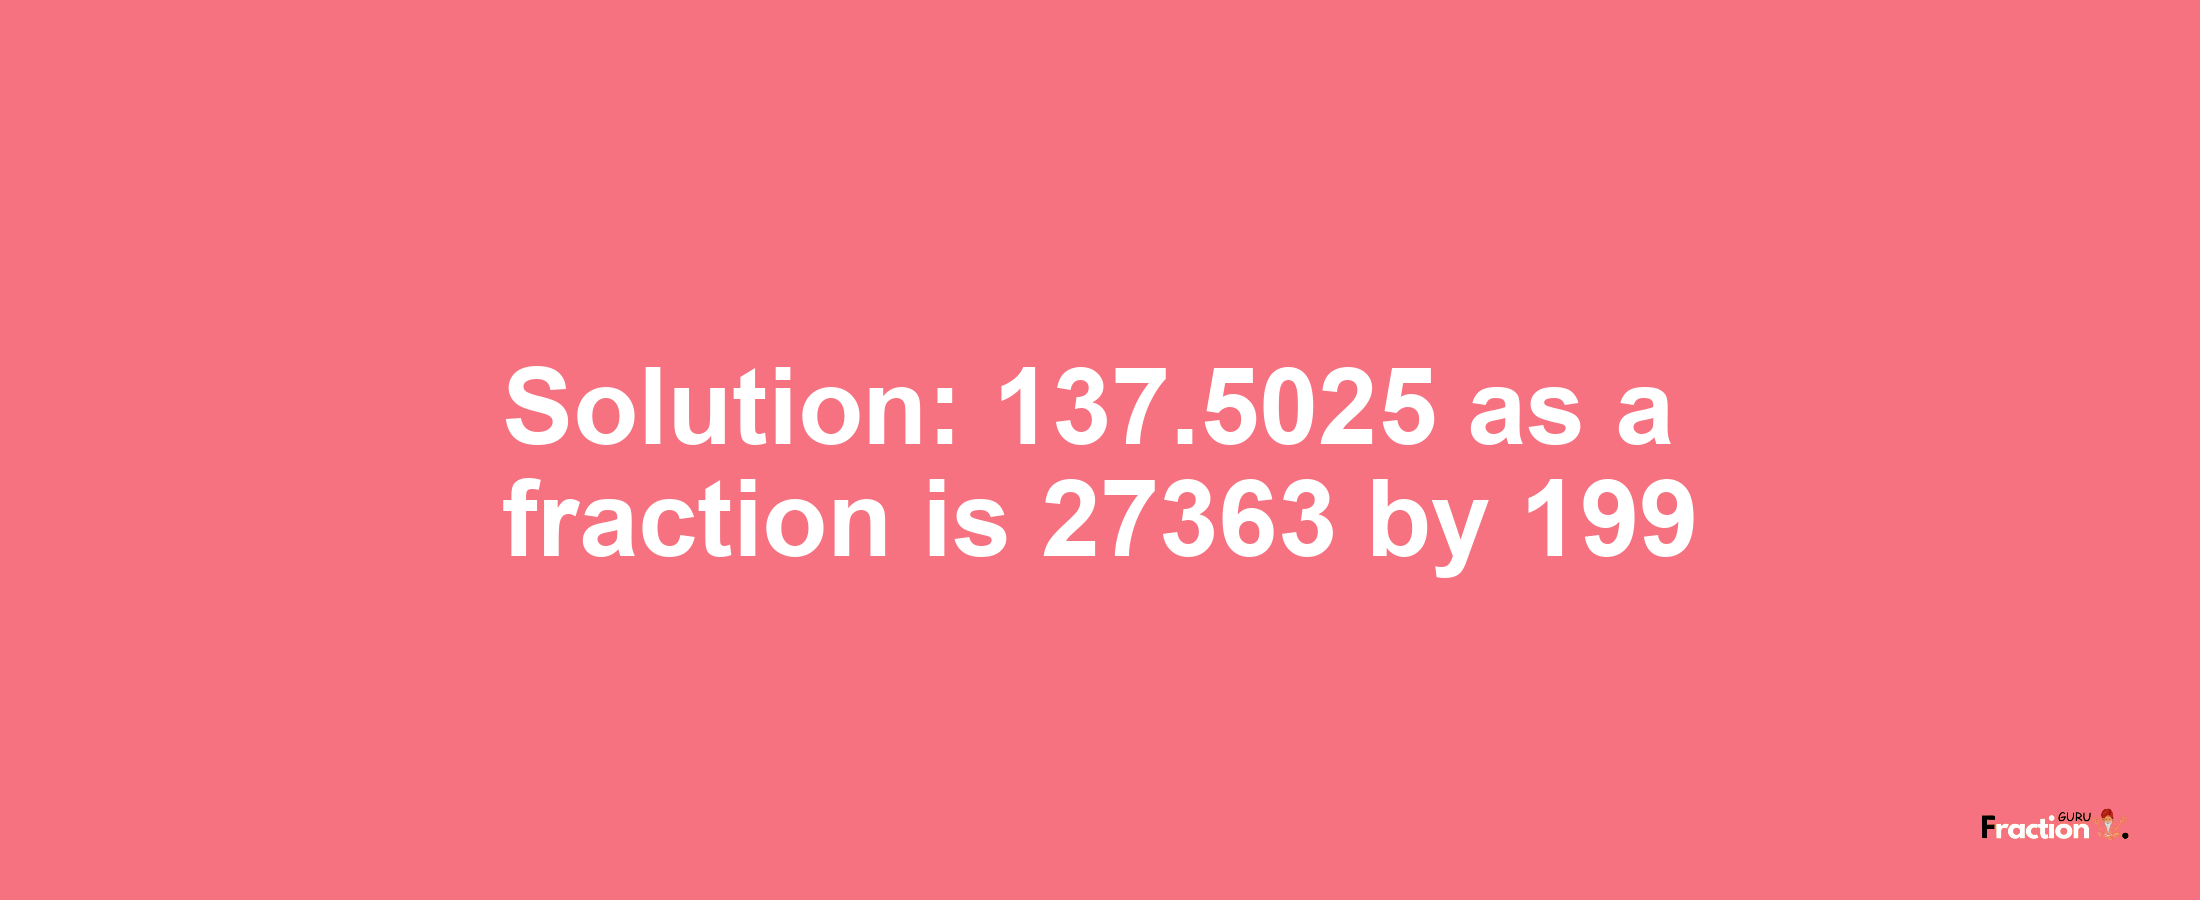 Solution:137.5025 as a fraction is 27363/199